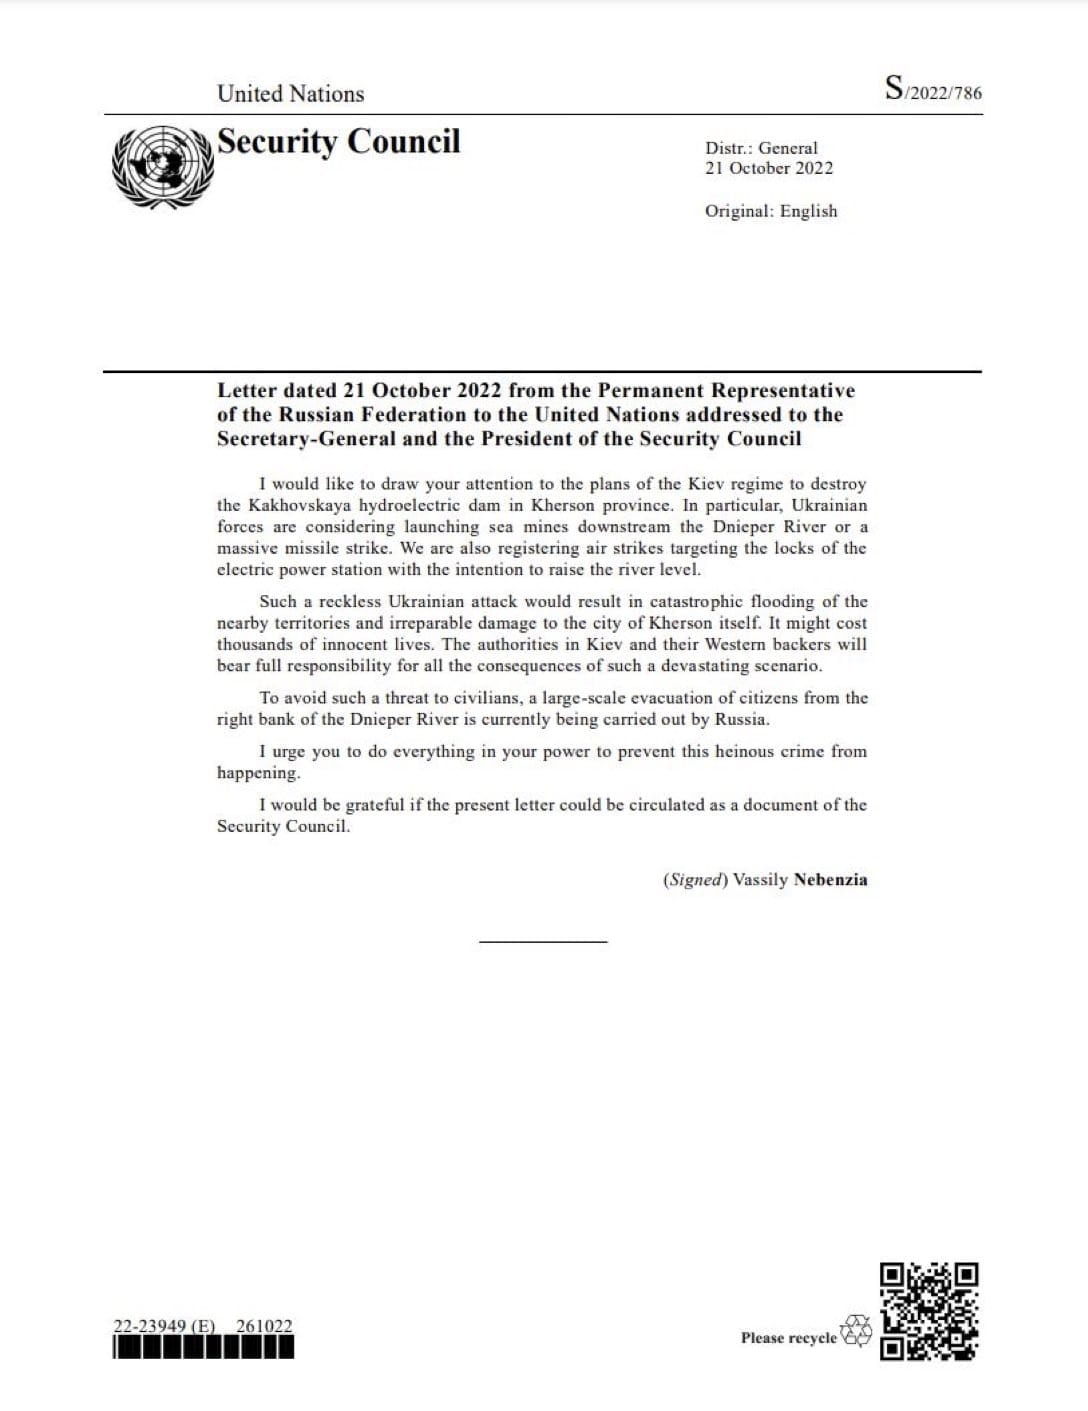 Russian letter to the UN Security Council, dated October...